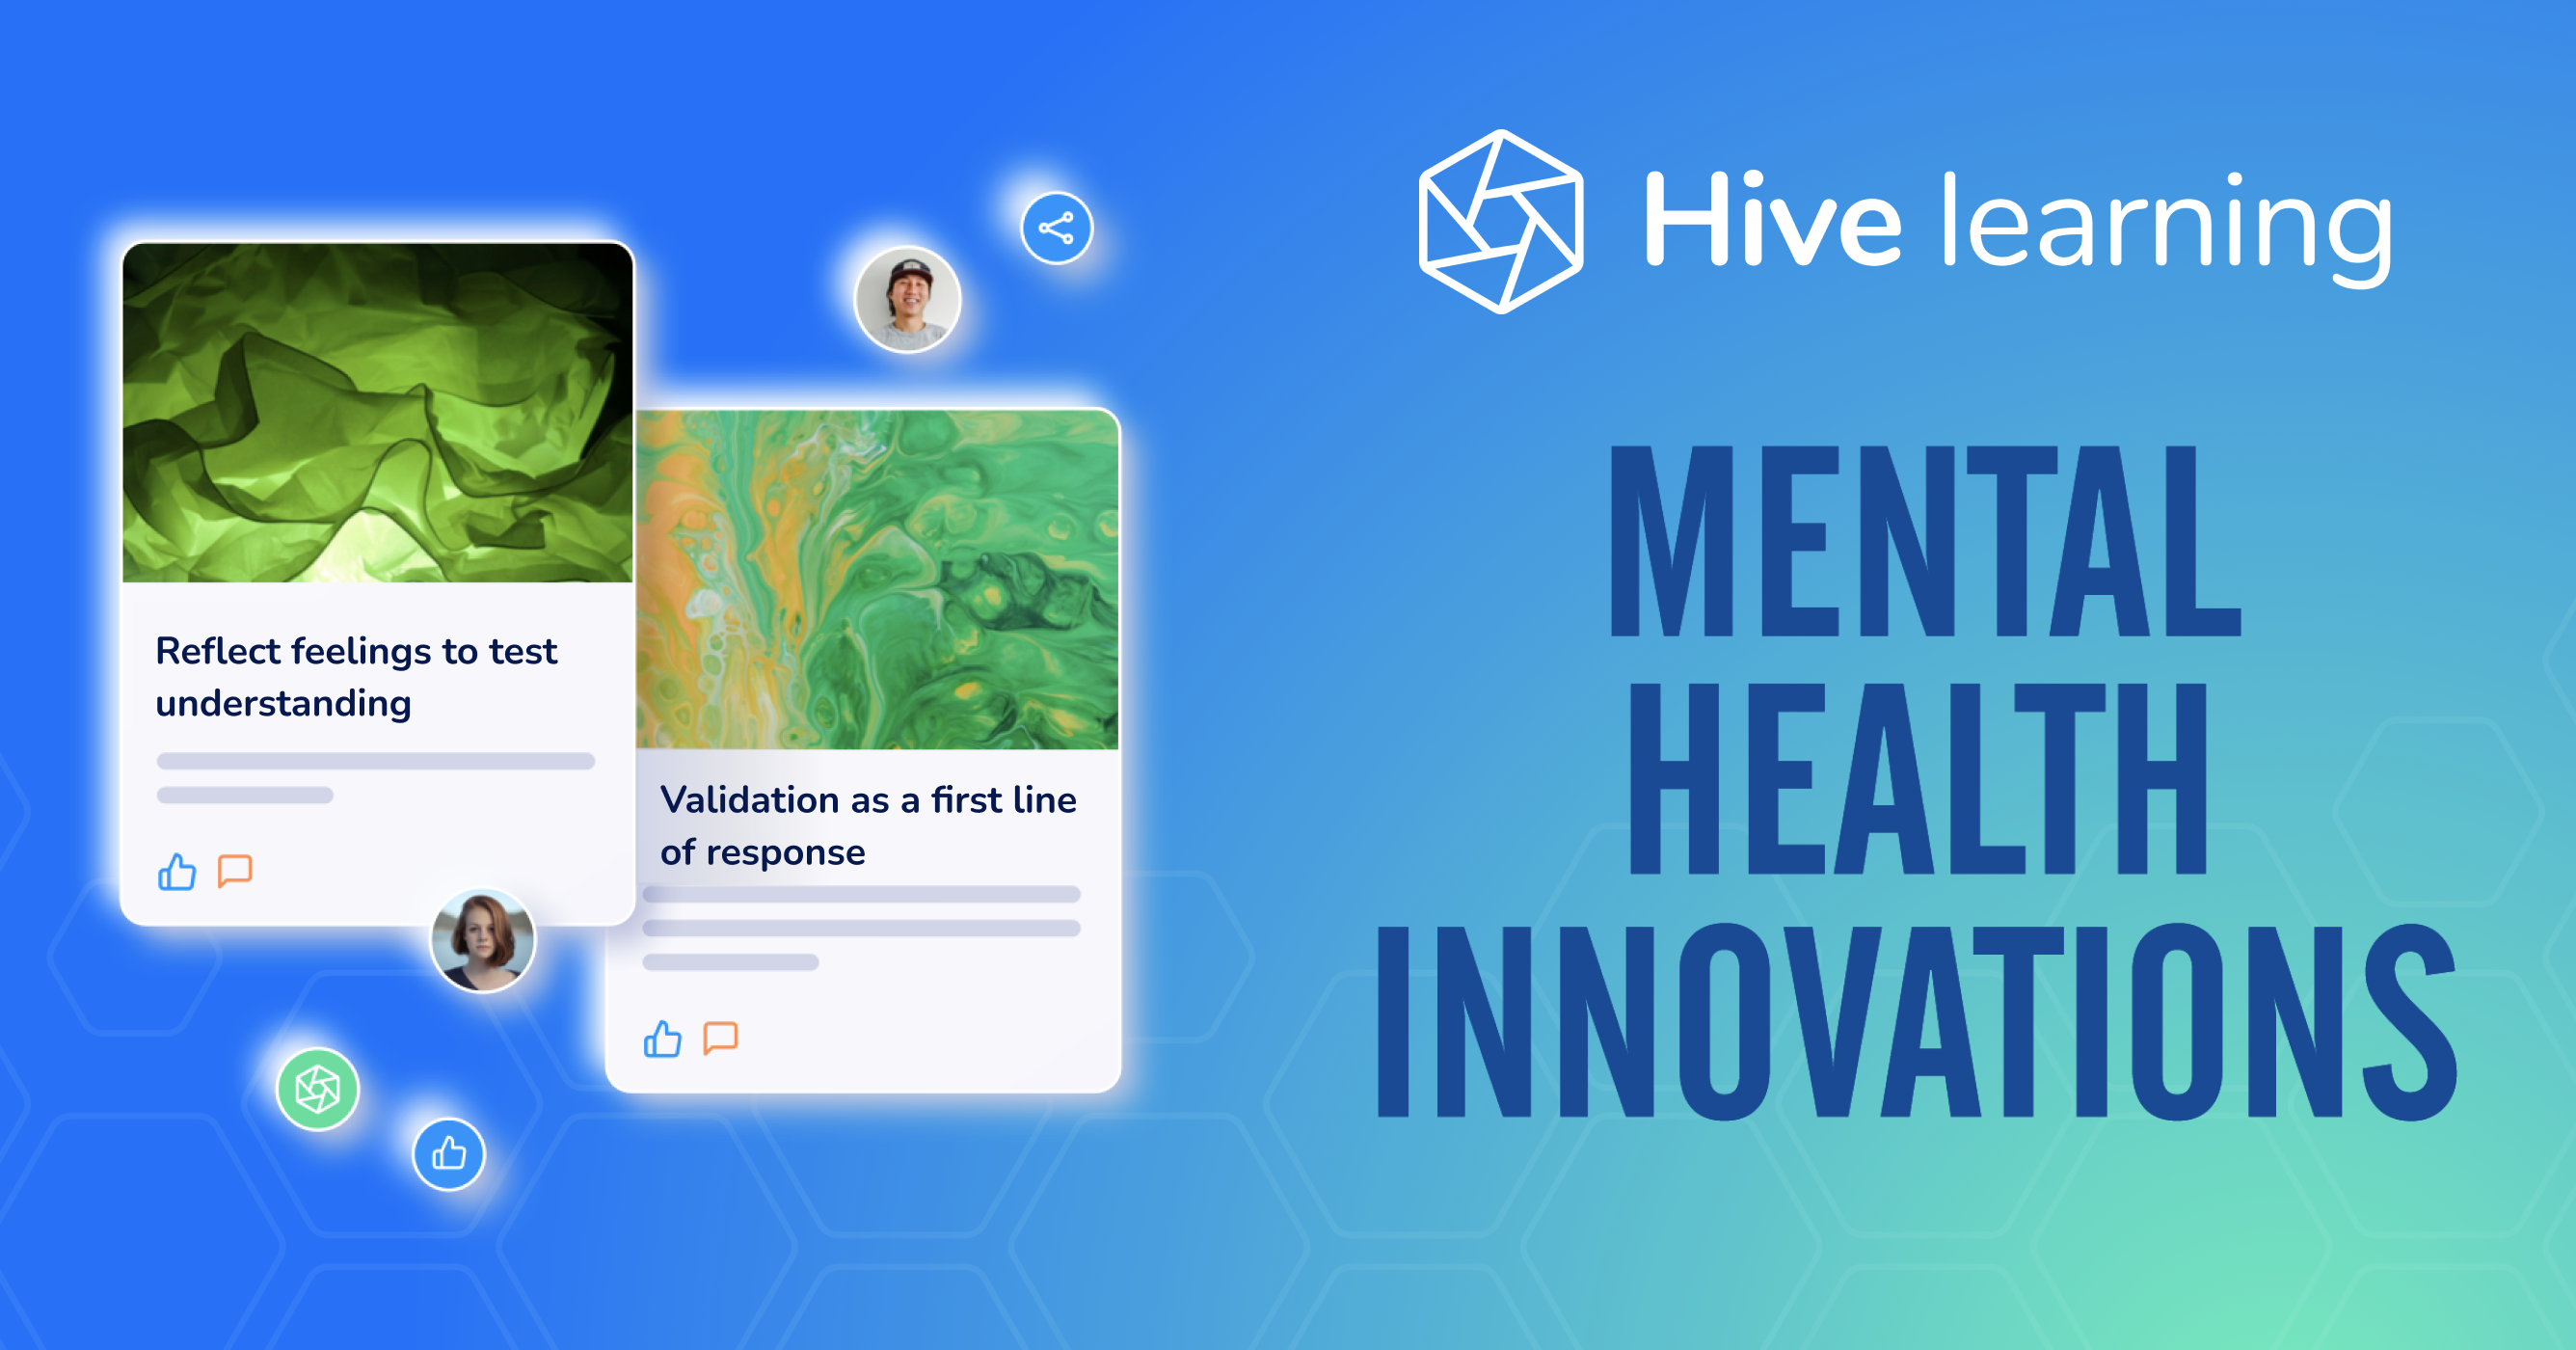 Mental Health Innovation - Hive learning